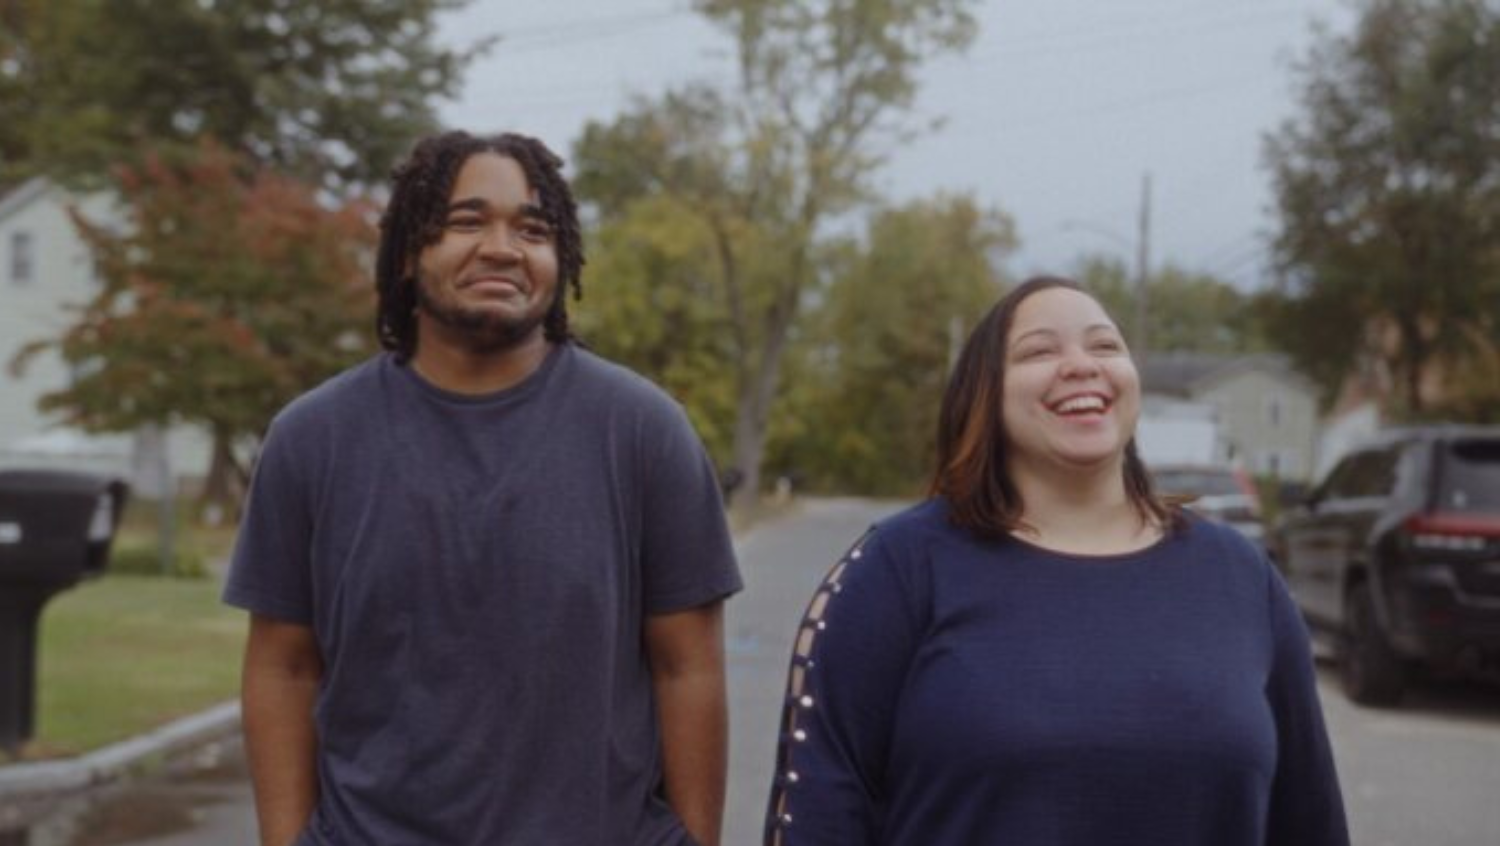 Two people: a young Black boy with dreadlocks and his mother, a light-skinned woman with straight hair are walking on a suburban street on a cloudy day. They are both laughing